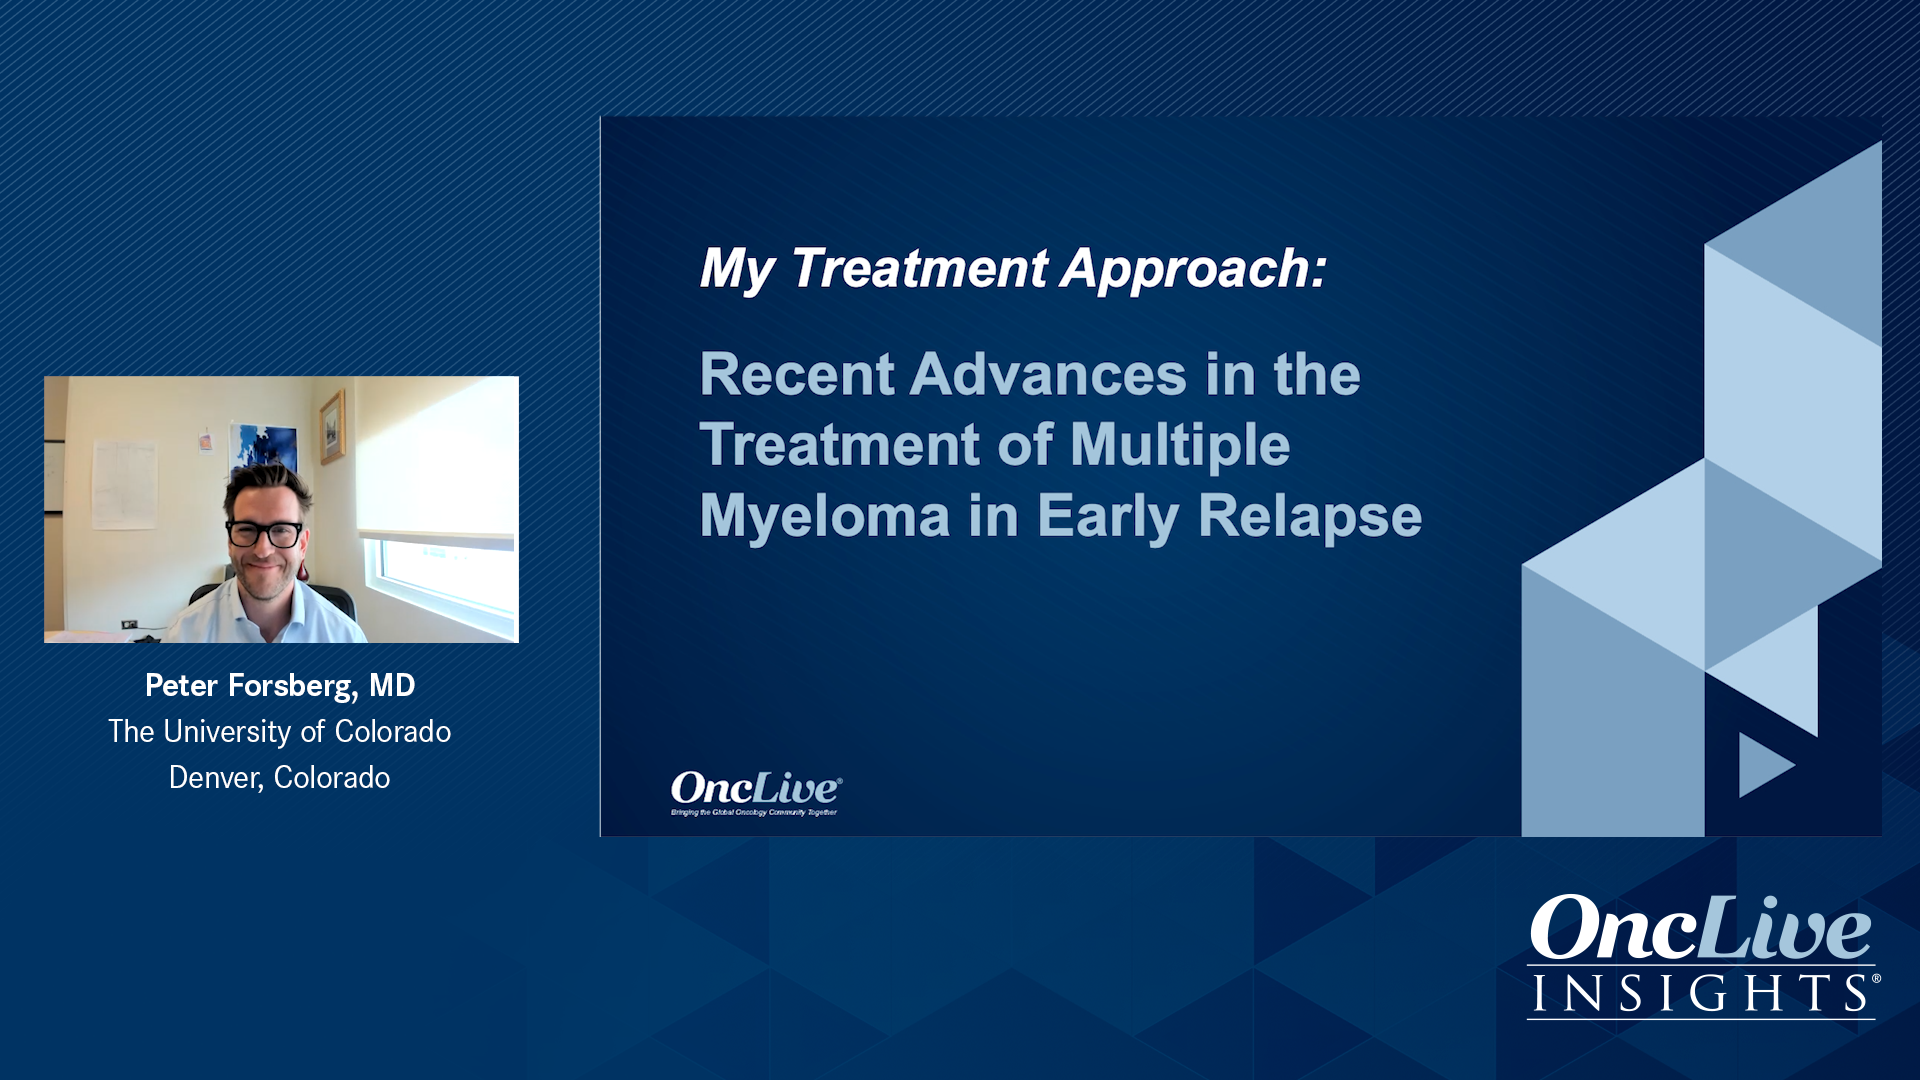 Treatment Options for Patients with Multiple Myeloma in Early Relapse